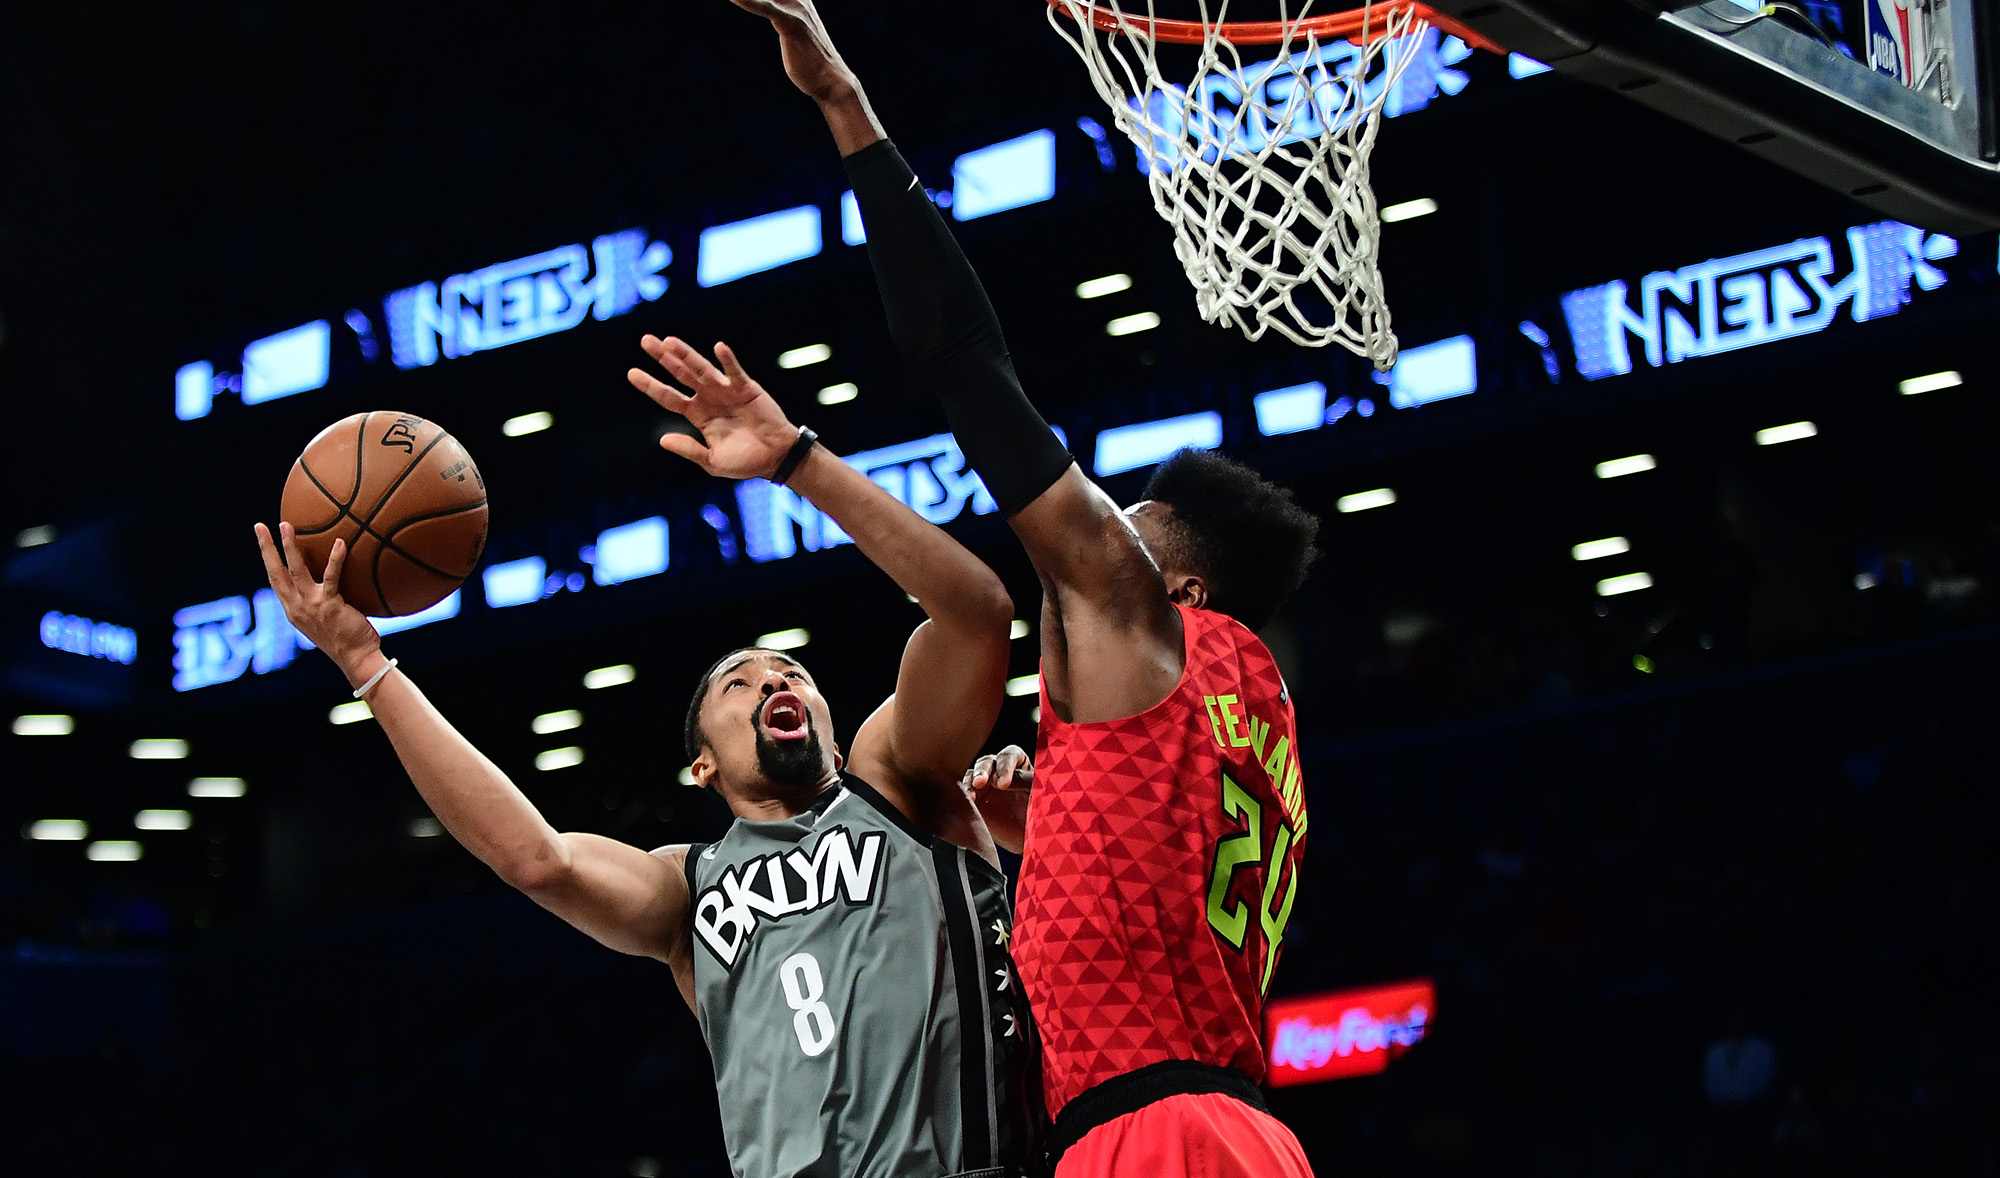 Spencer Dinwiddie of the Brooklyn Nets attempts a shot during a game&nbsp;in Brooklyn&nbsp;in 2019.